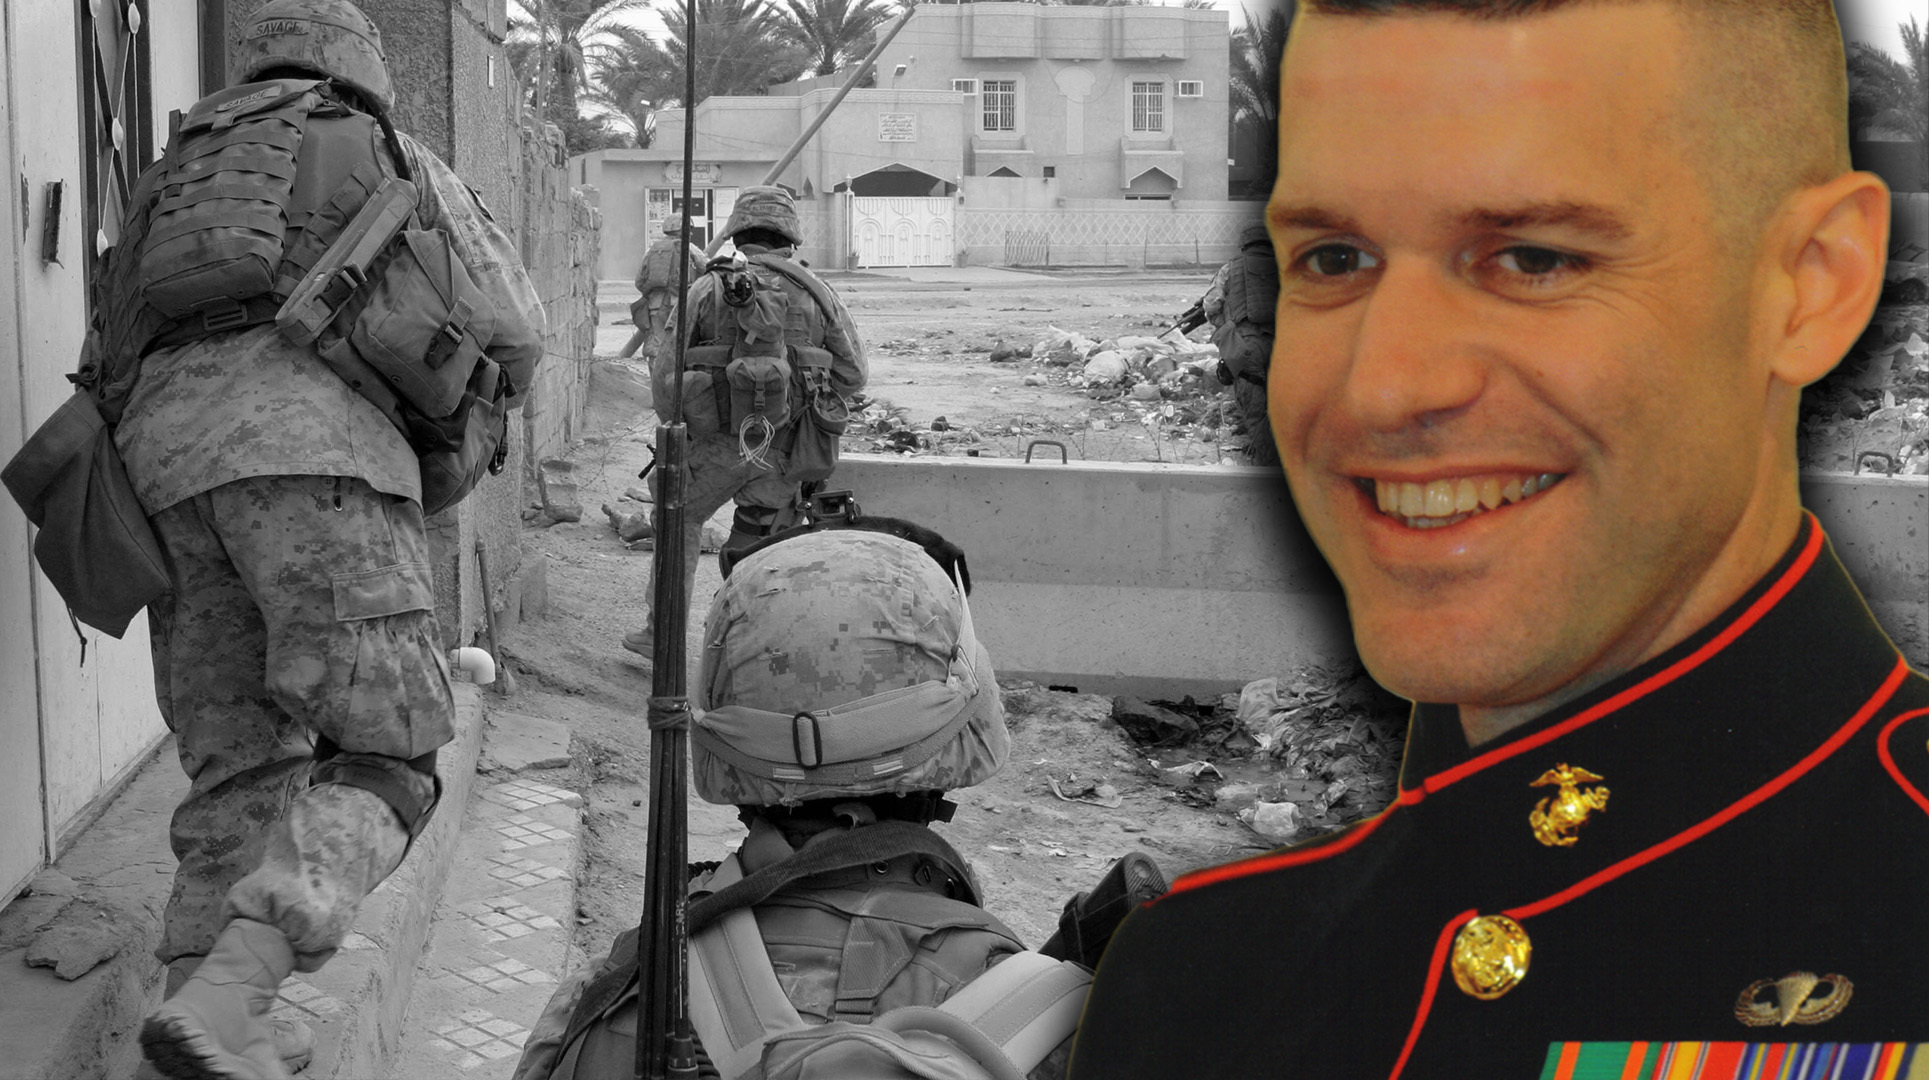 Reporter-turned-Marine Bill Cahir was ‘among the greatest Americans of our generation’